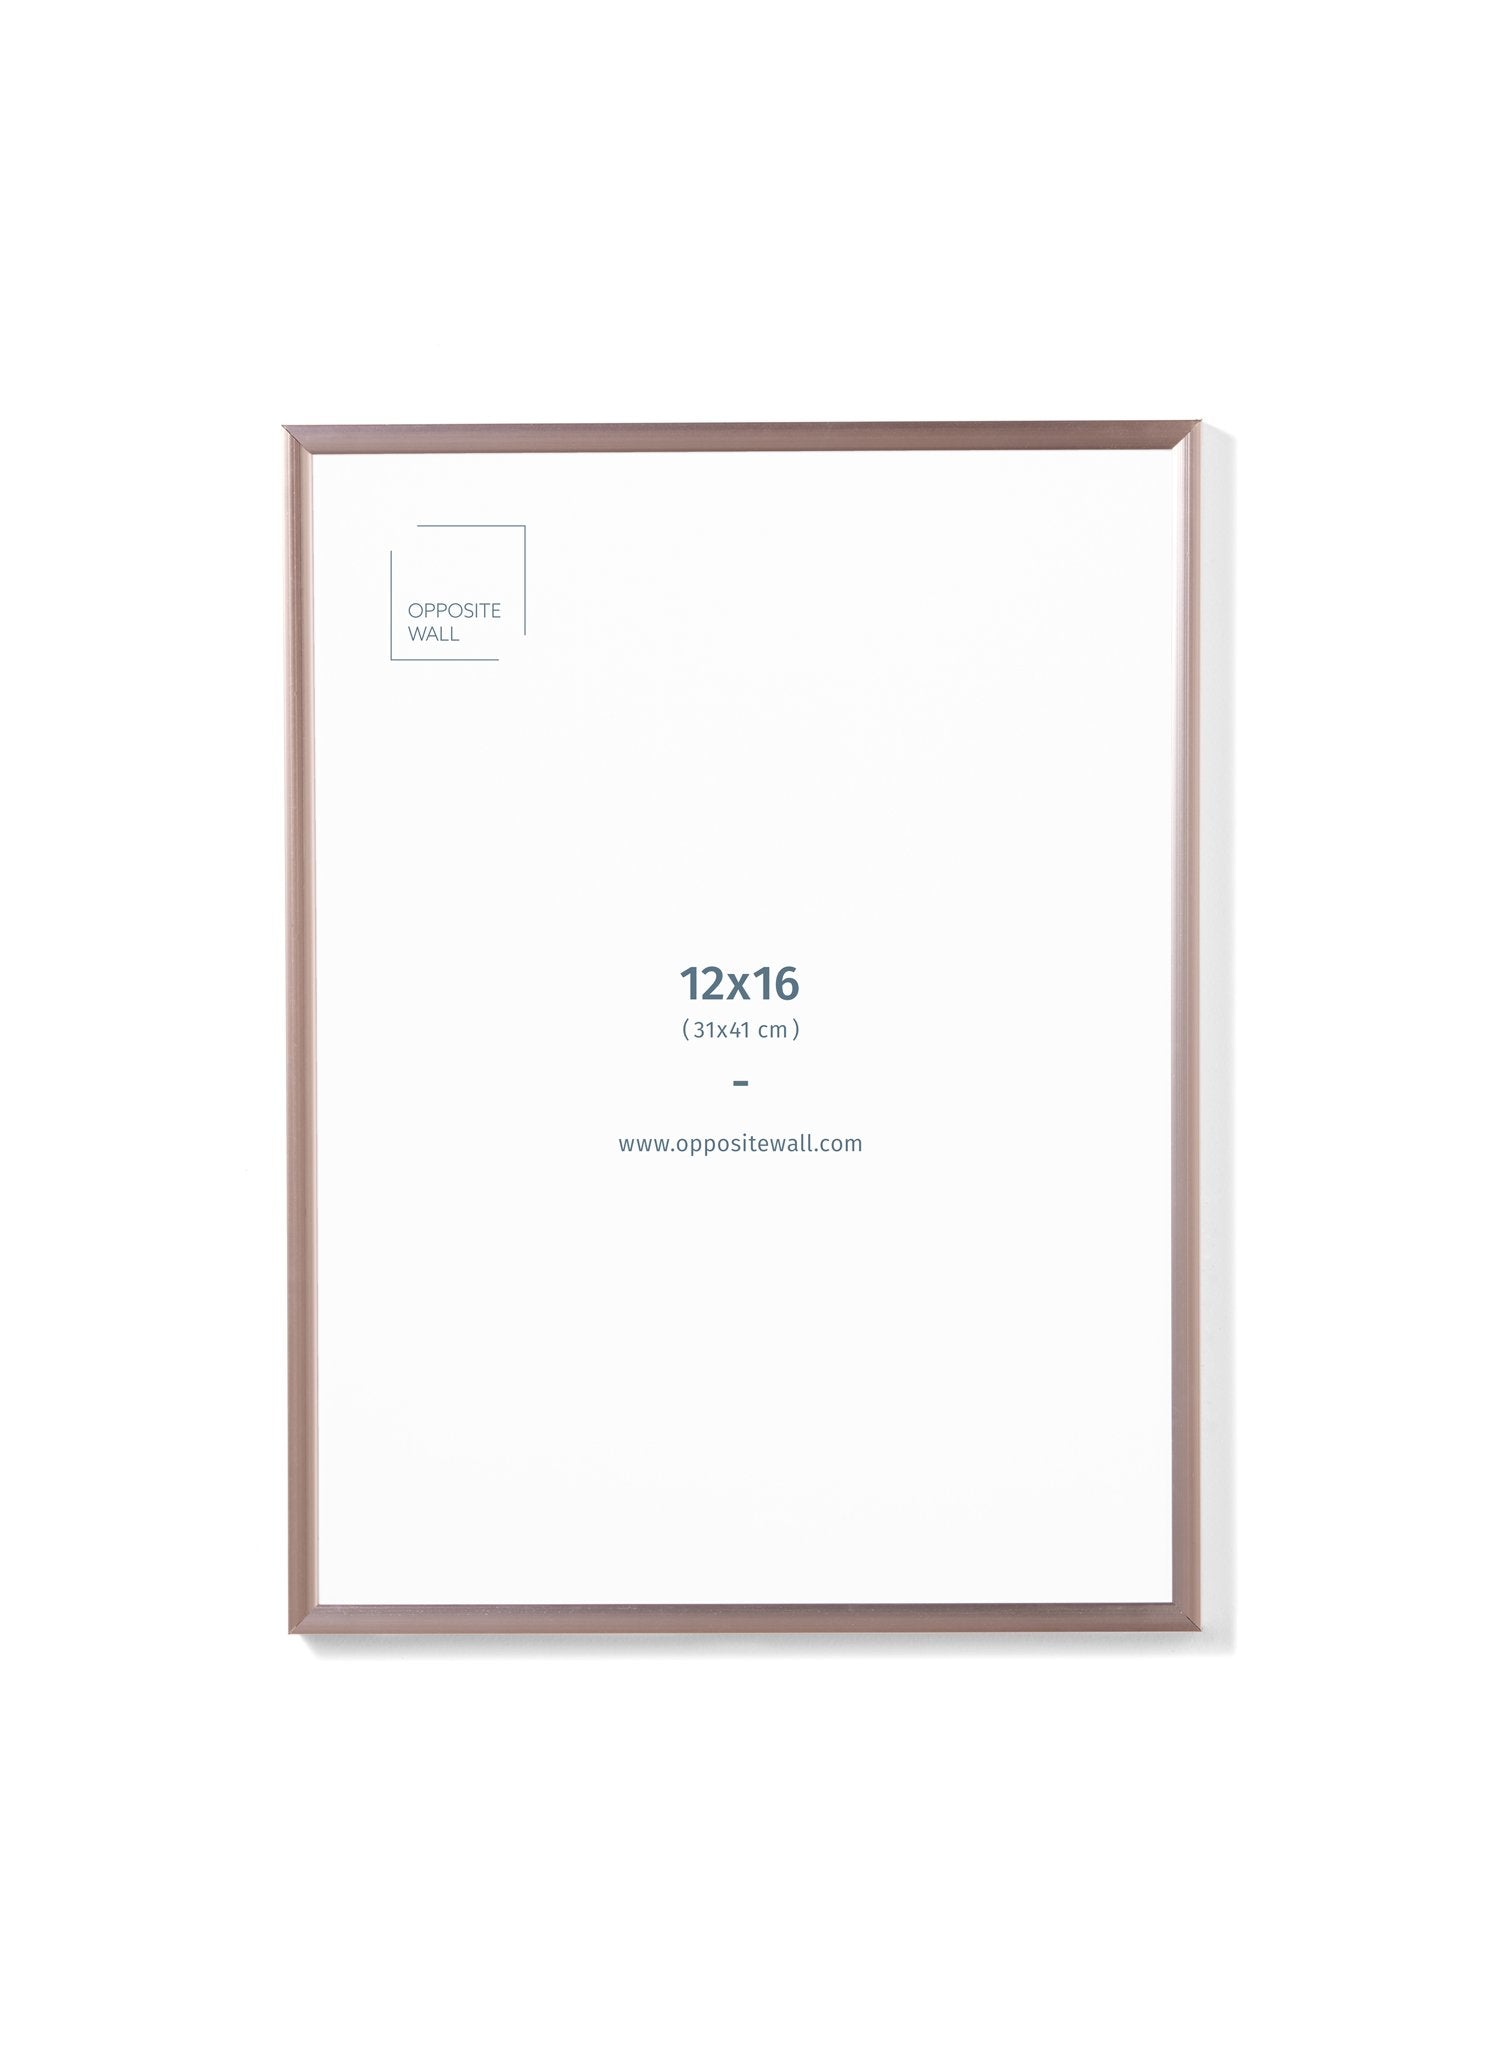 Scandinavian rose gold aluminum metal frame by Opposite Wall - Front of the frame - Size 12x16